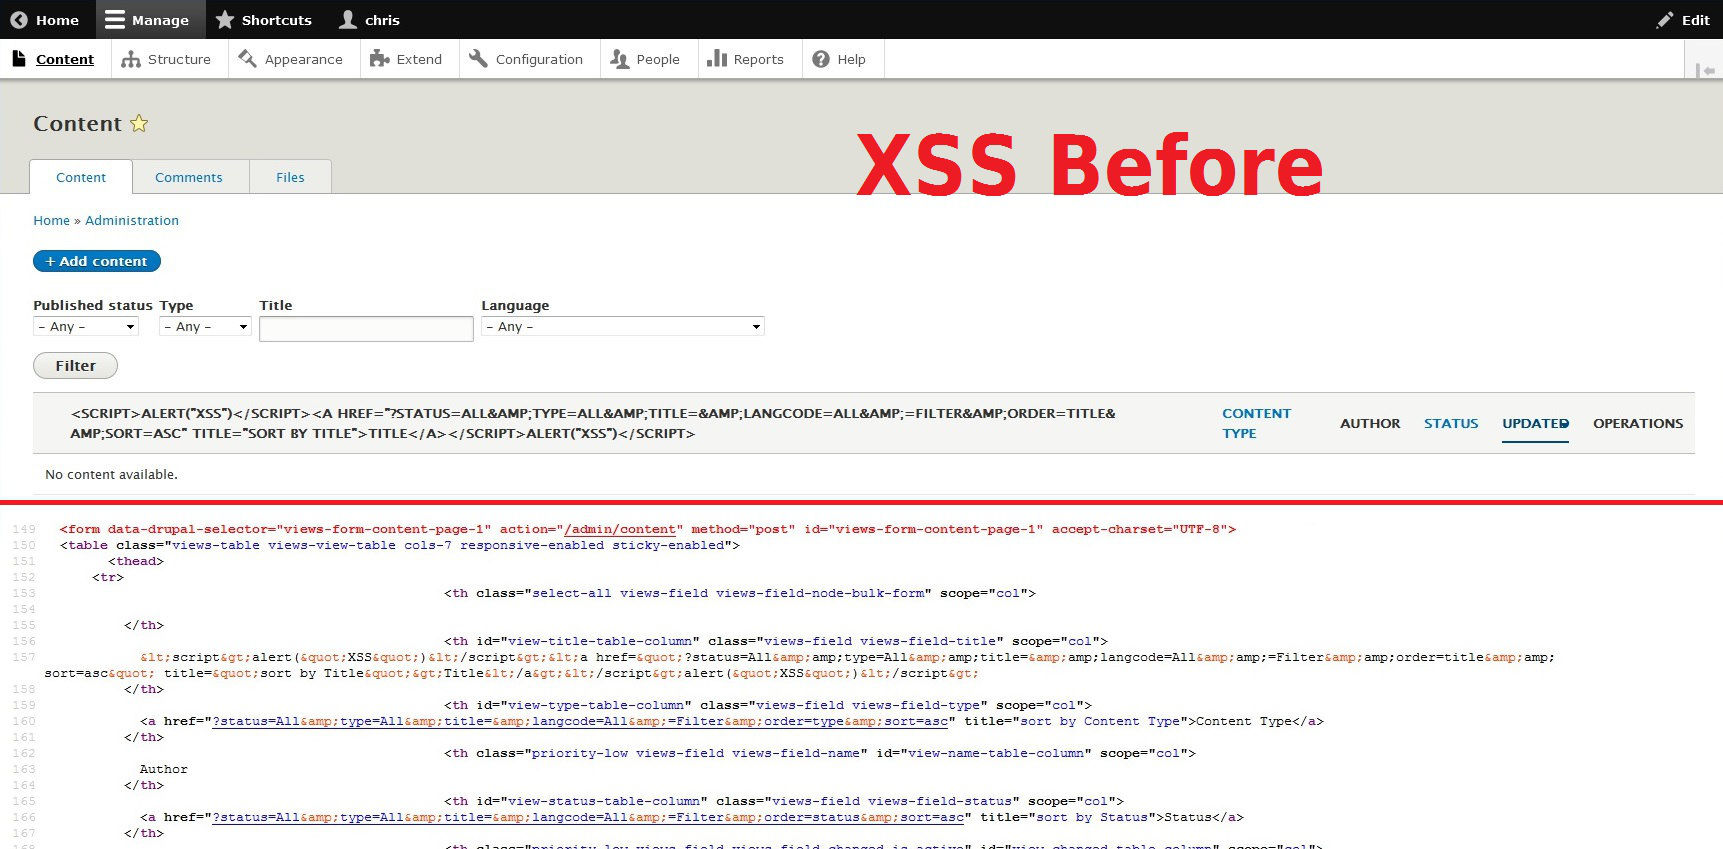 XSS Before Patch